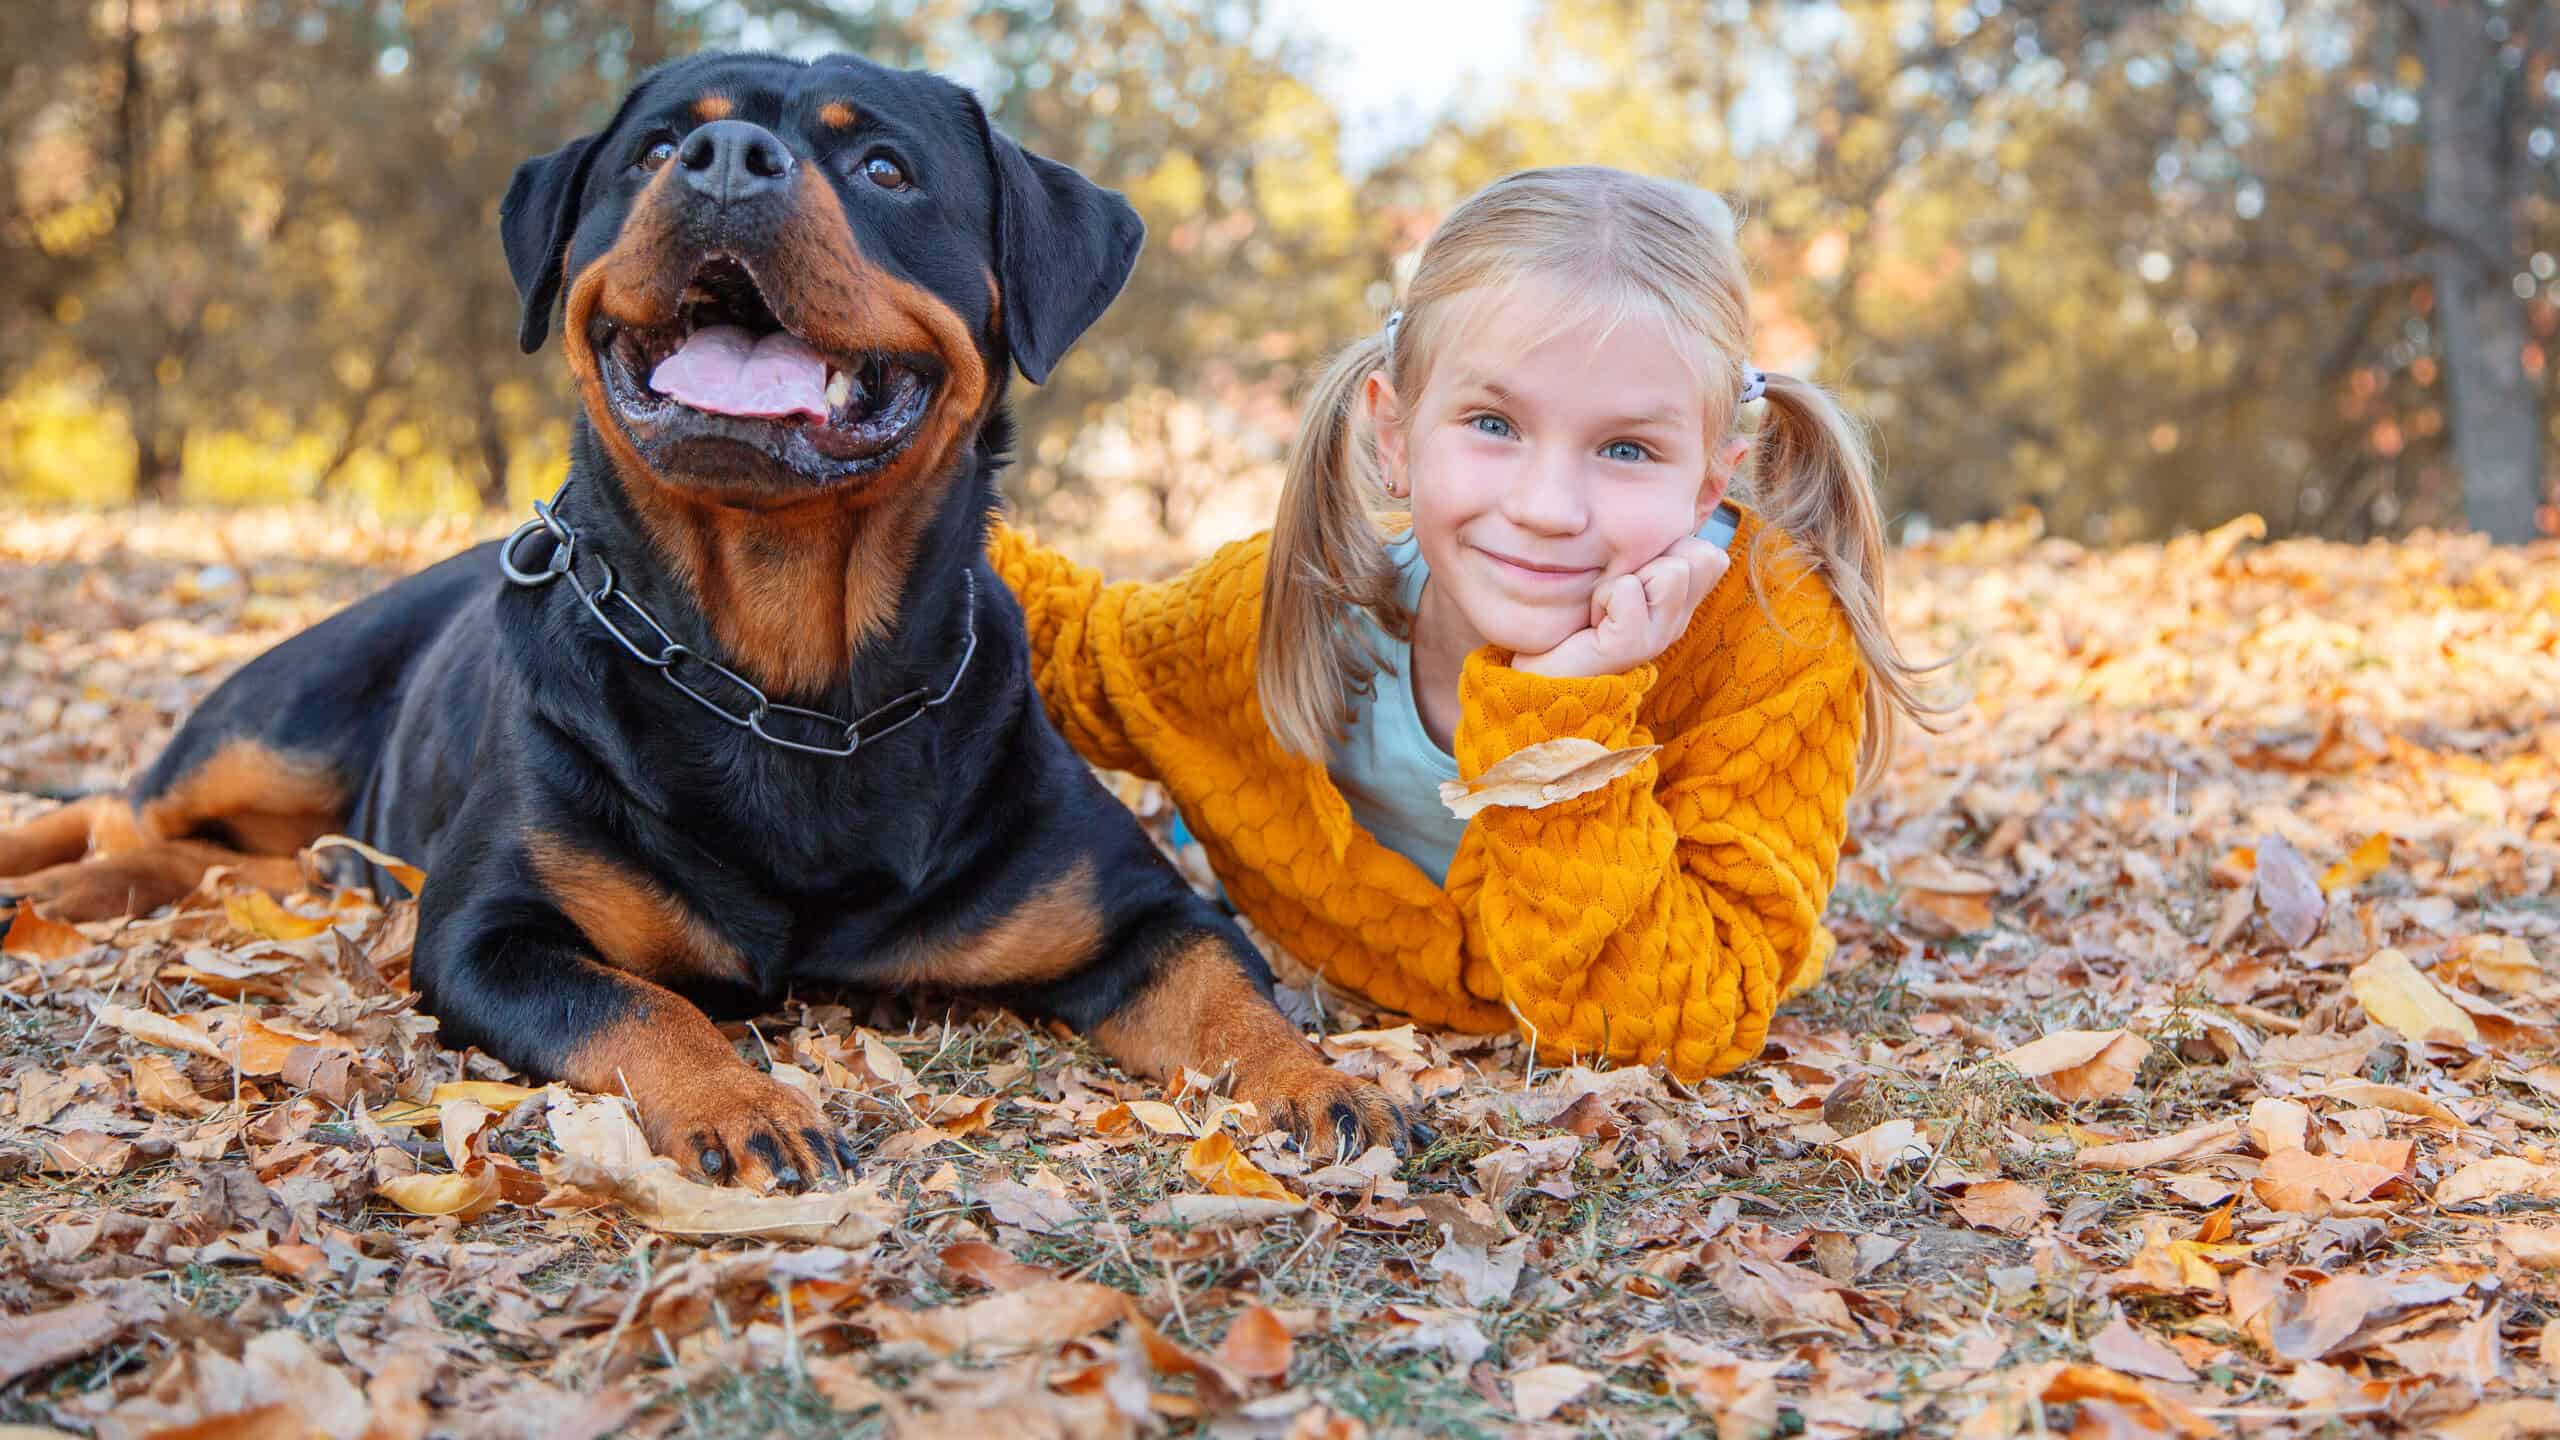 Child with Rottweiler